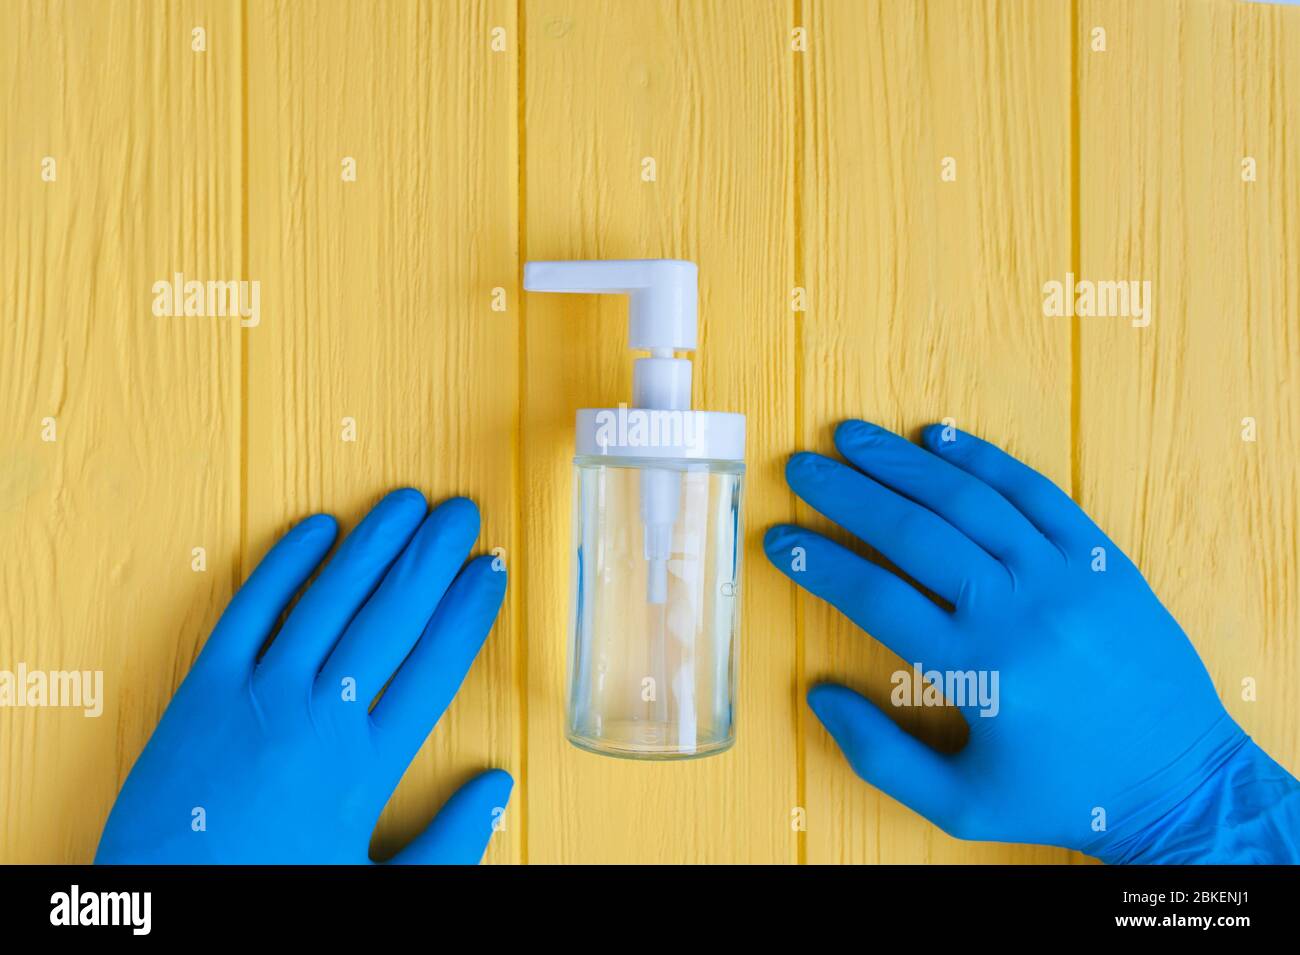 Hand sanitizer bottle and blue gloved hands close up. Call for hand disinfection. Stop coronavirus concept. Using antibacterial gel for hands during Stock Photo